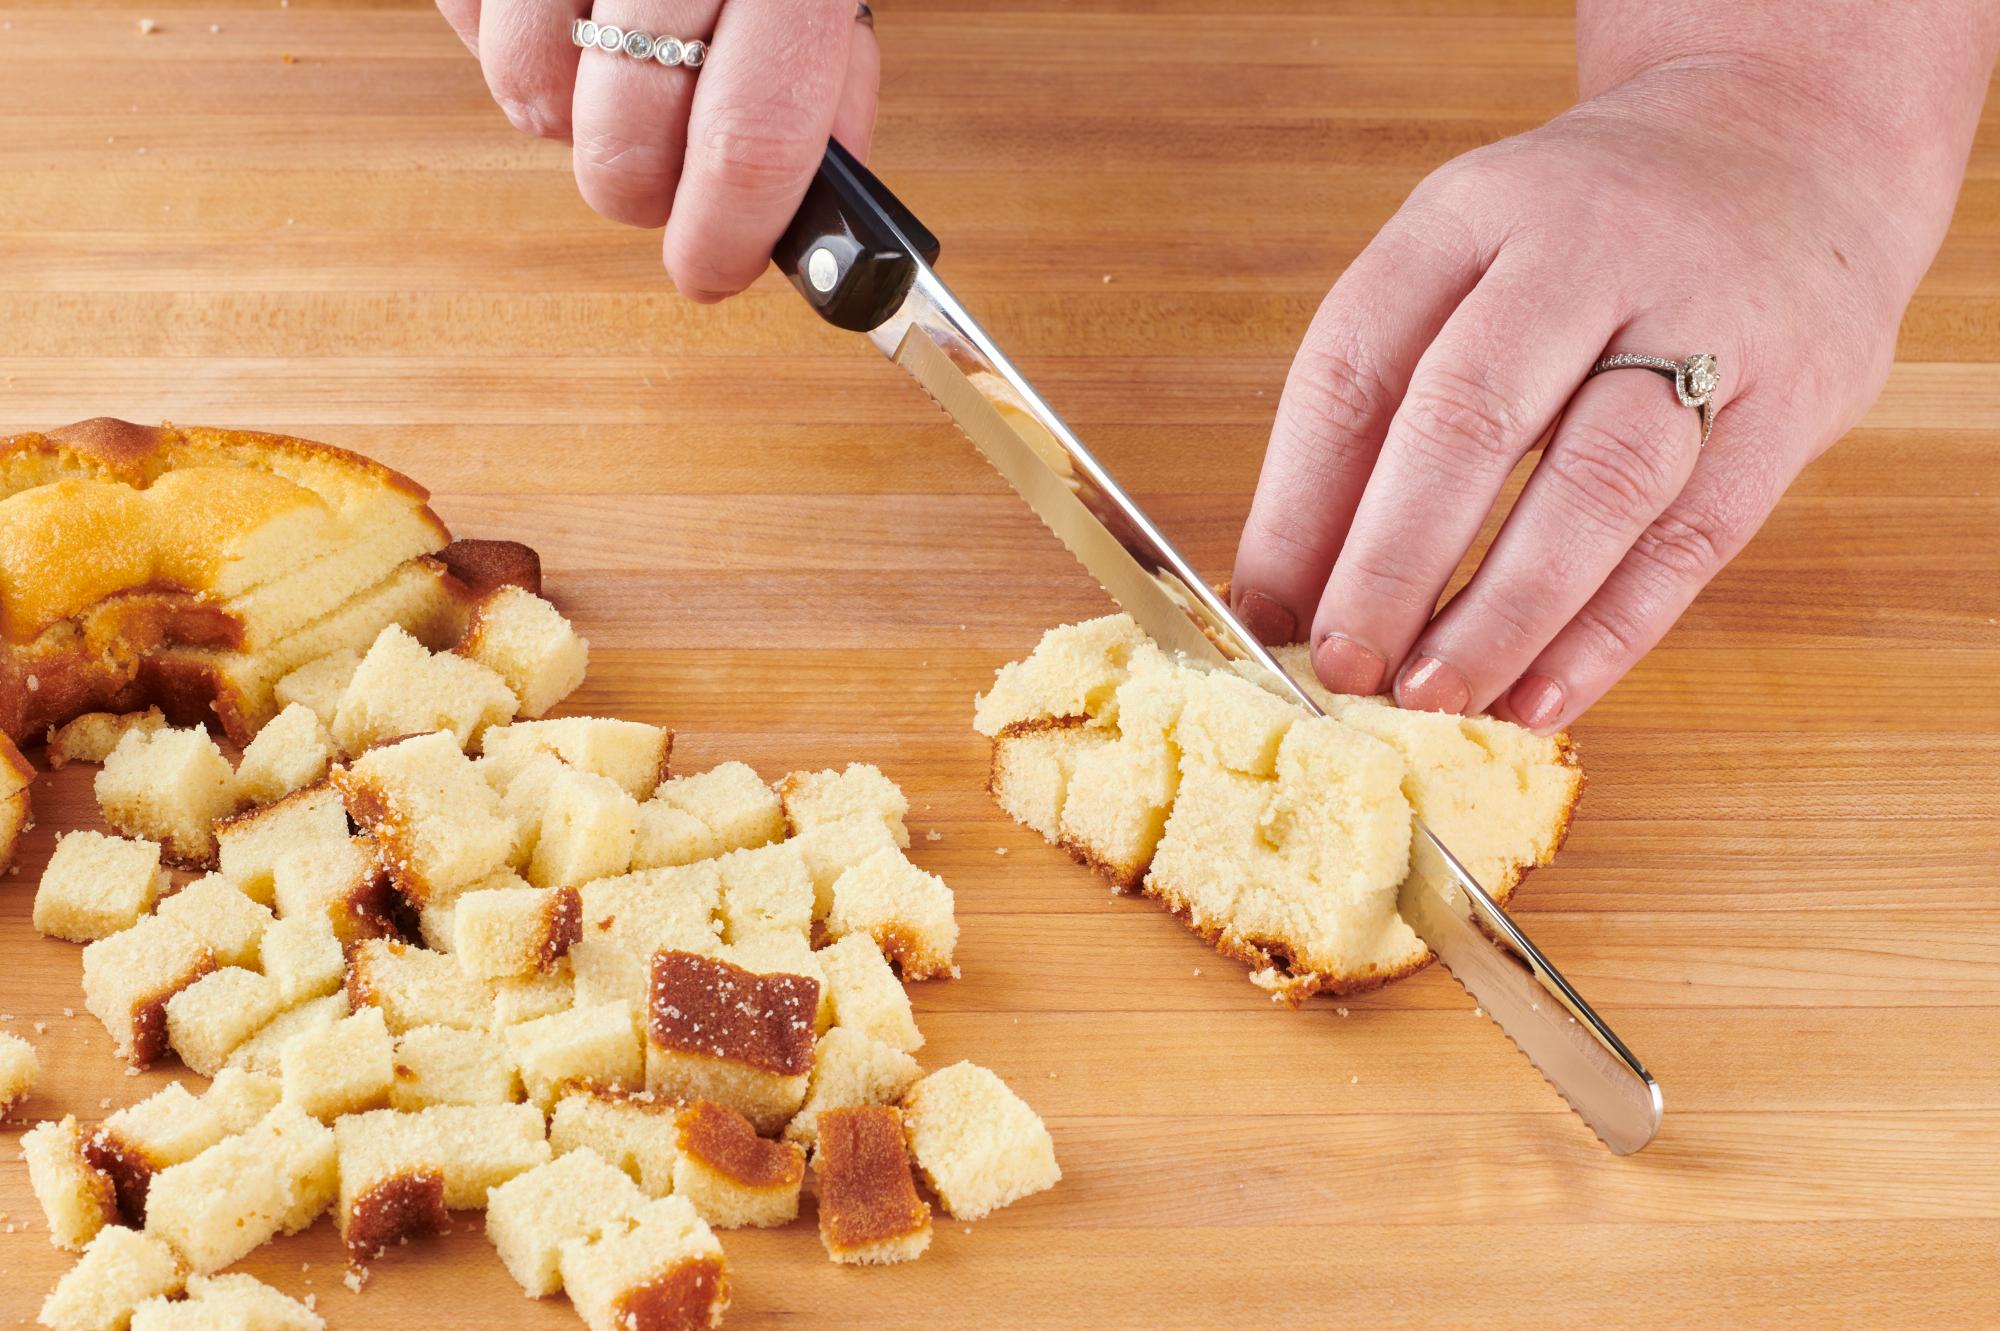 Cutting the pound cake into cubes with a Petite Slicer.